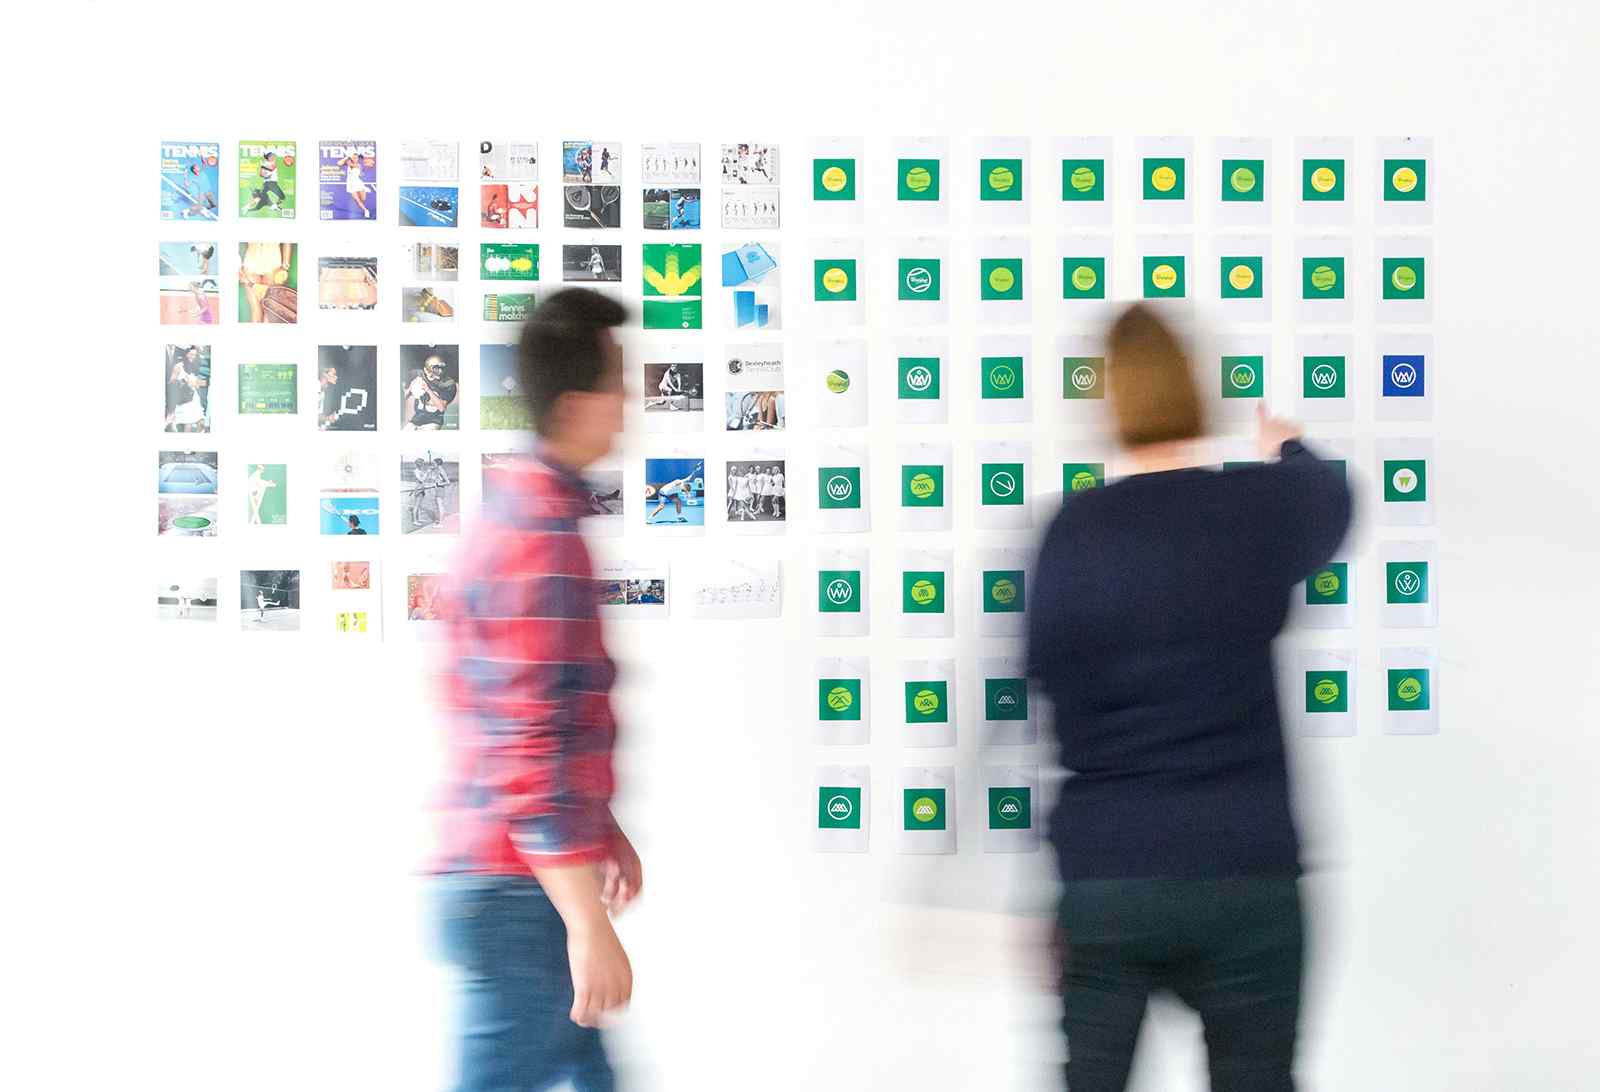 Branding agency designers collaborating on a project with logo variations and visuals displayed on the wall.